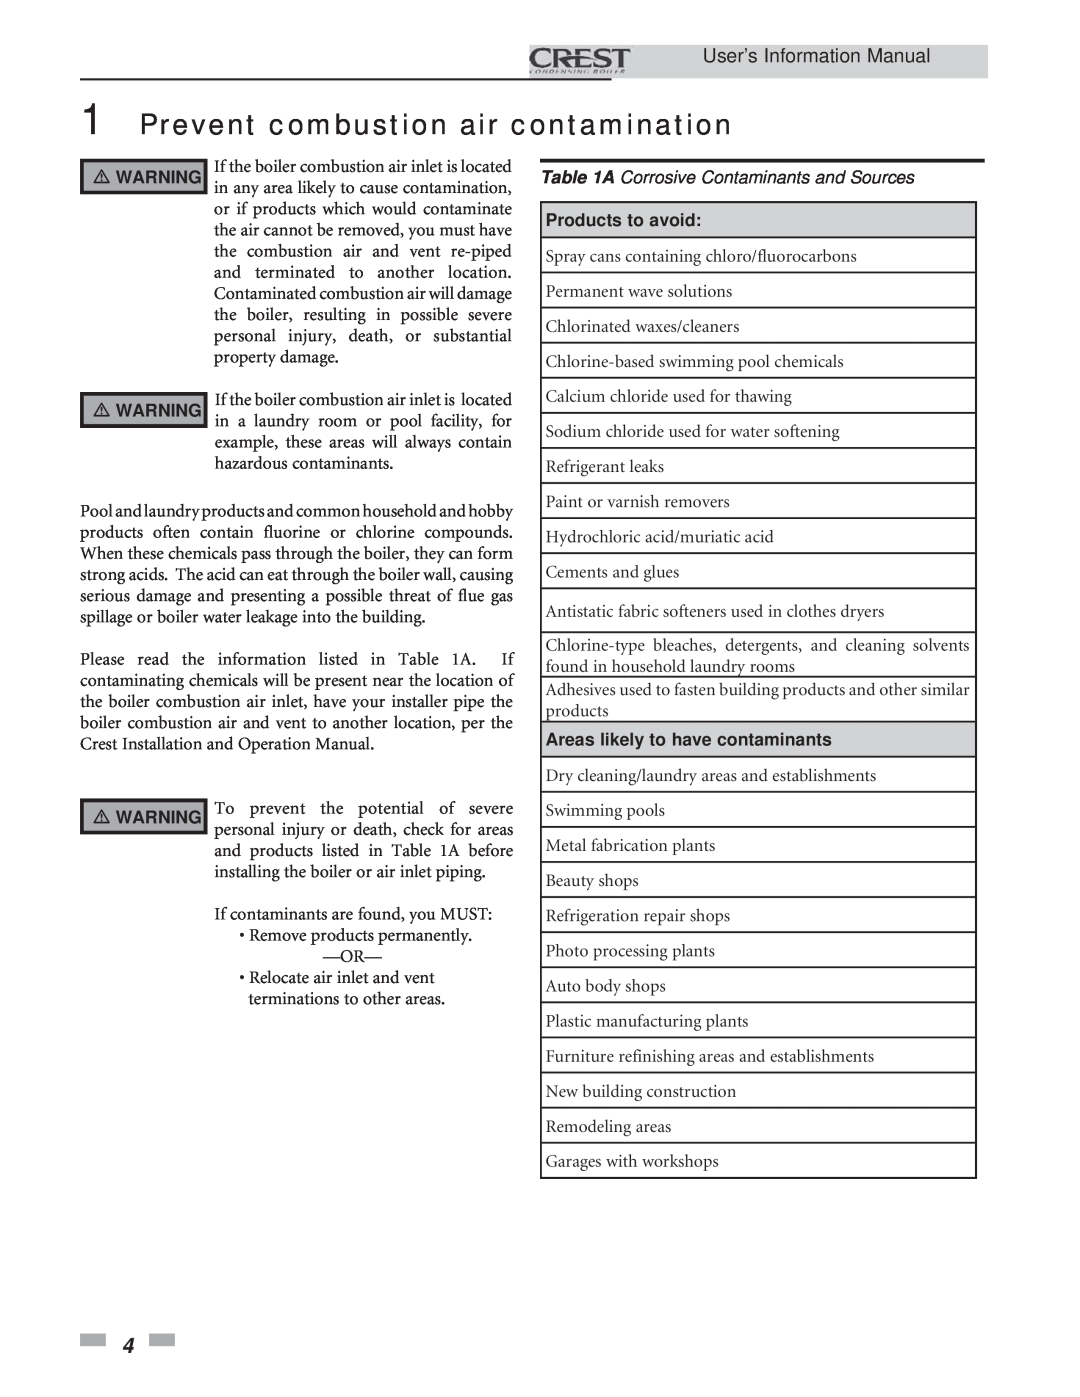 Lochinvar 1.5 Prevent combustion air contamination, User’s Information Manual, A Corrosive Contaminants and Sources 